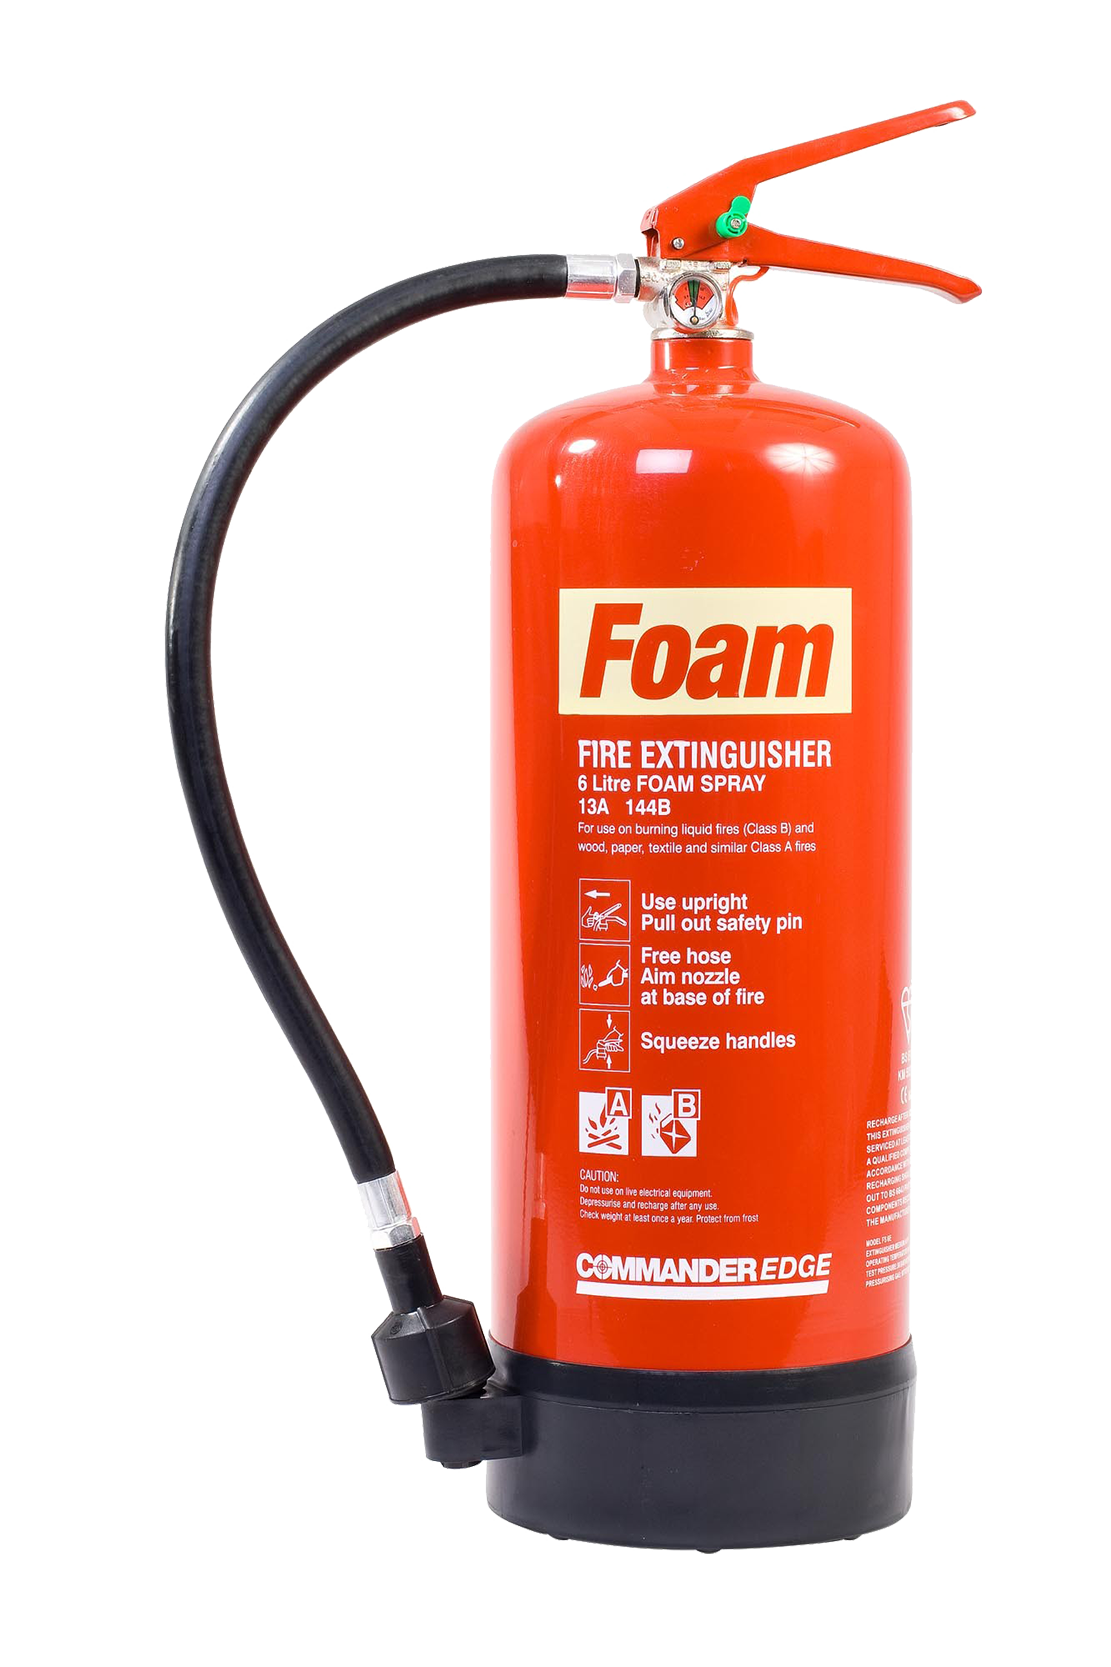 Download PNG image - Fire Extinguisher PNG Image 